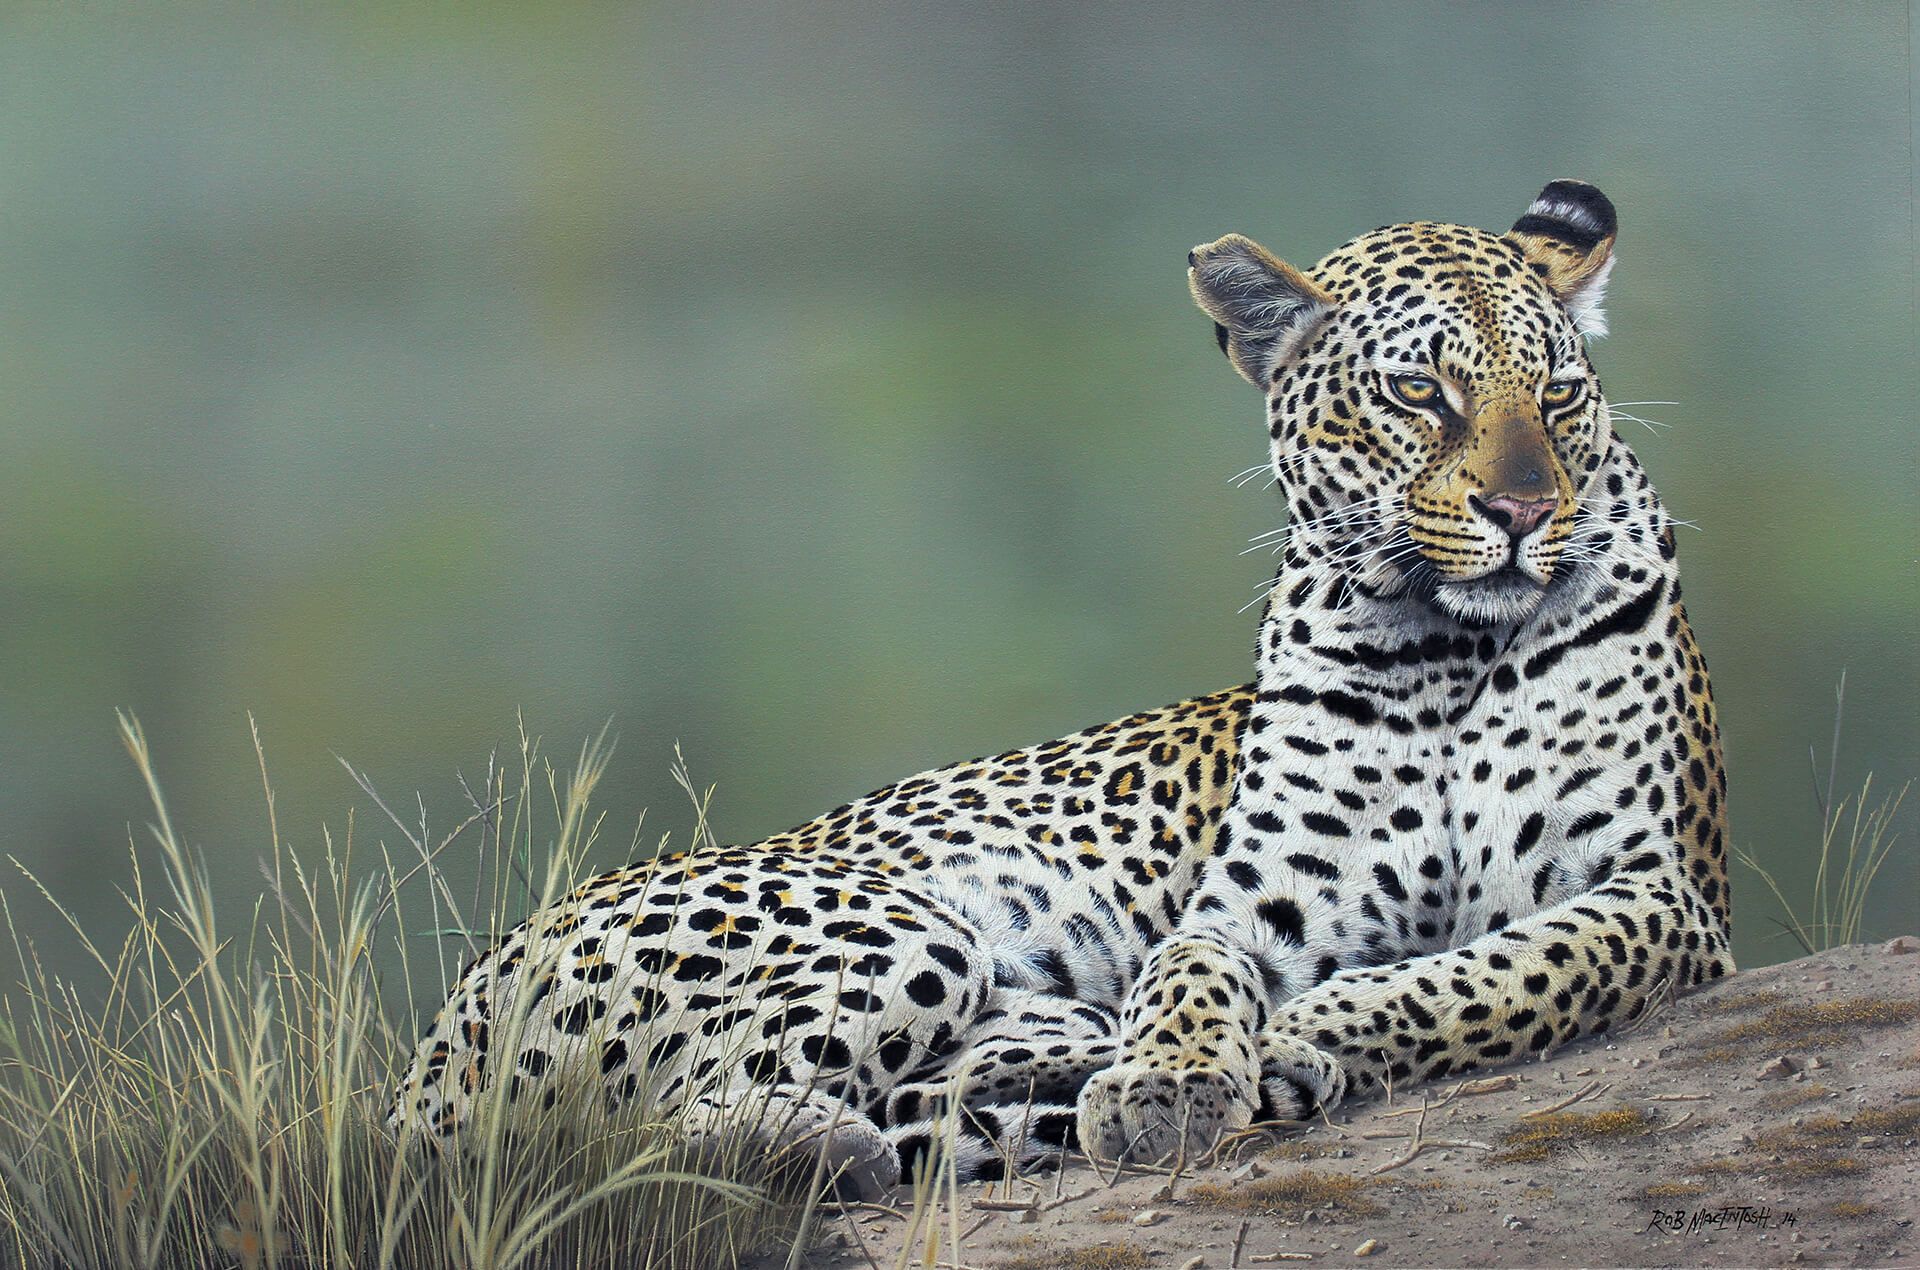 Photorealistic painting of a leopard resting